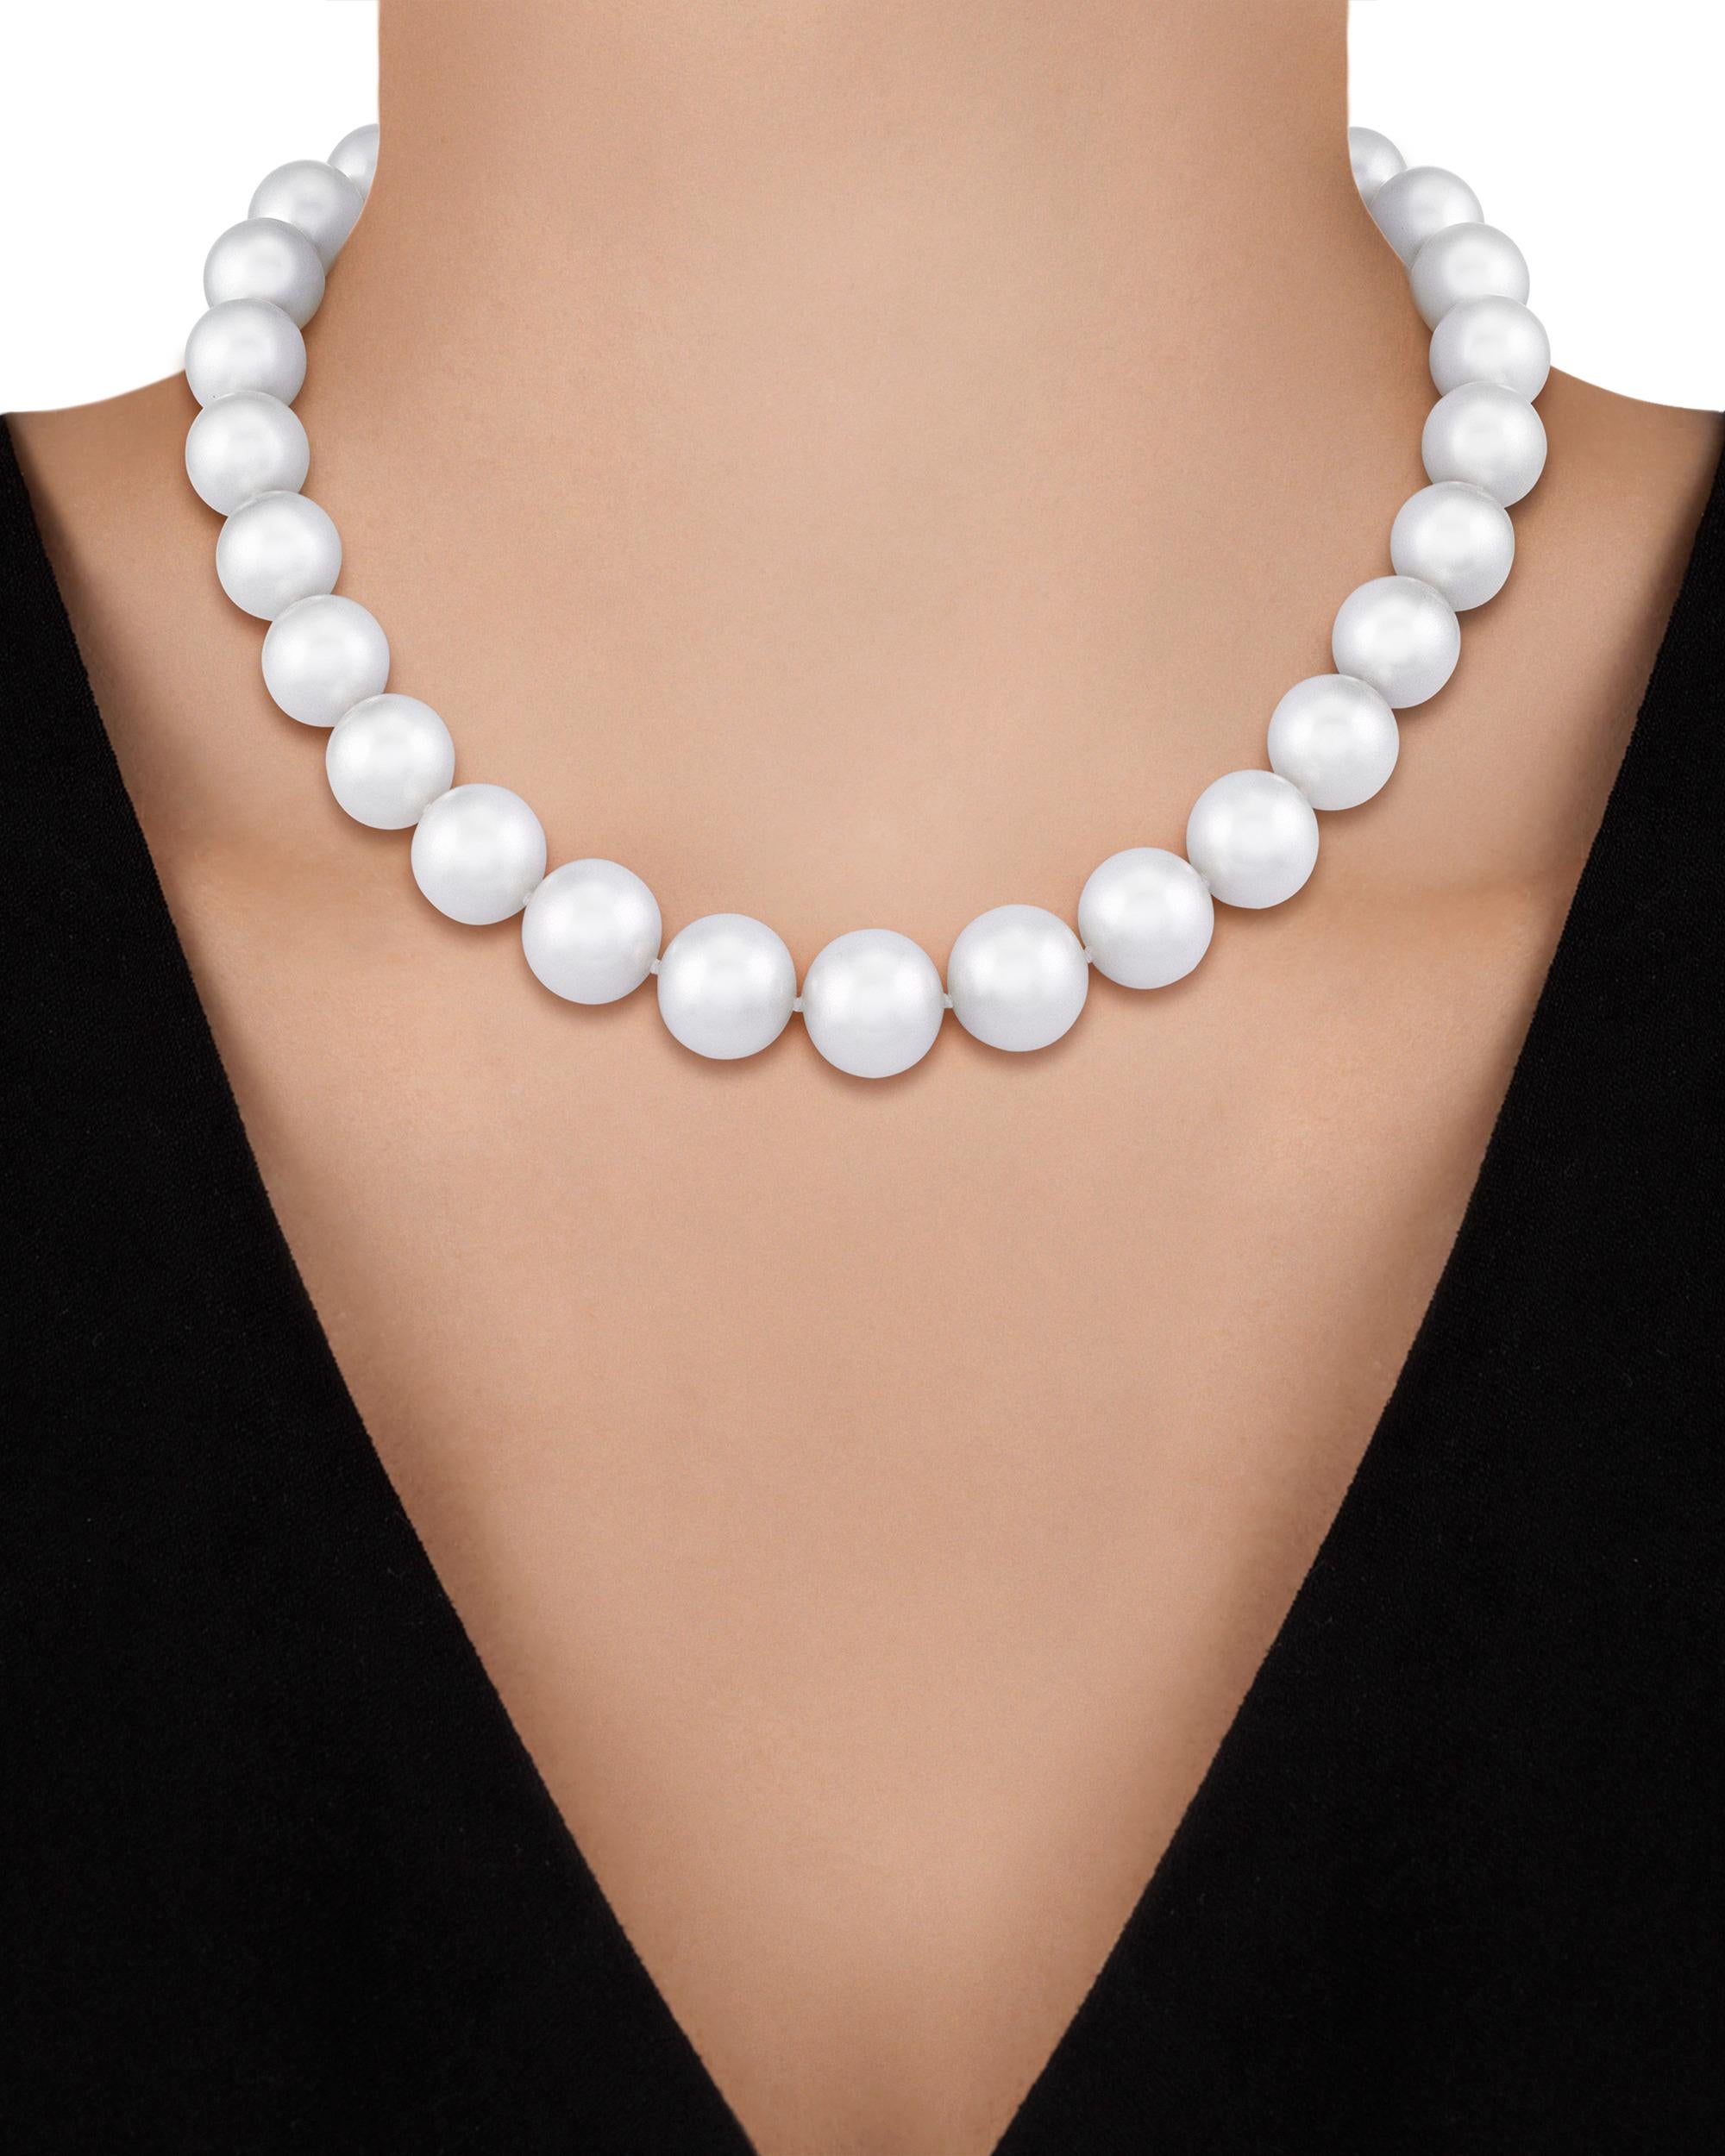 South Sea pearls are among the largest and most coveted pearls in the world, and the twenty-nine examples in this classic strand necklace can be counted among the finest of their kind. The perfectly matched, graduated gems measure 15mm to 13mm, and